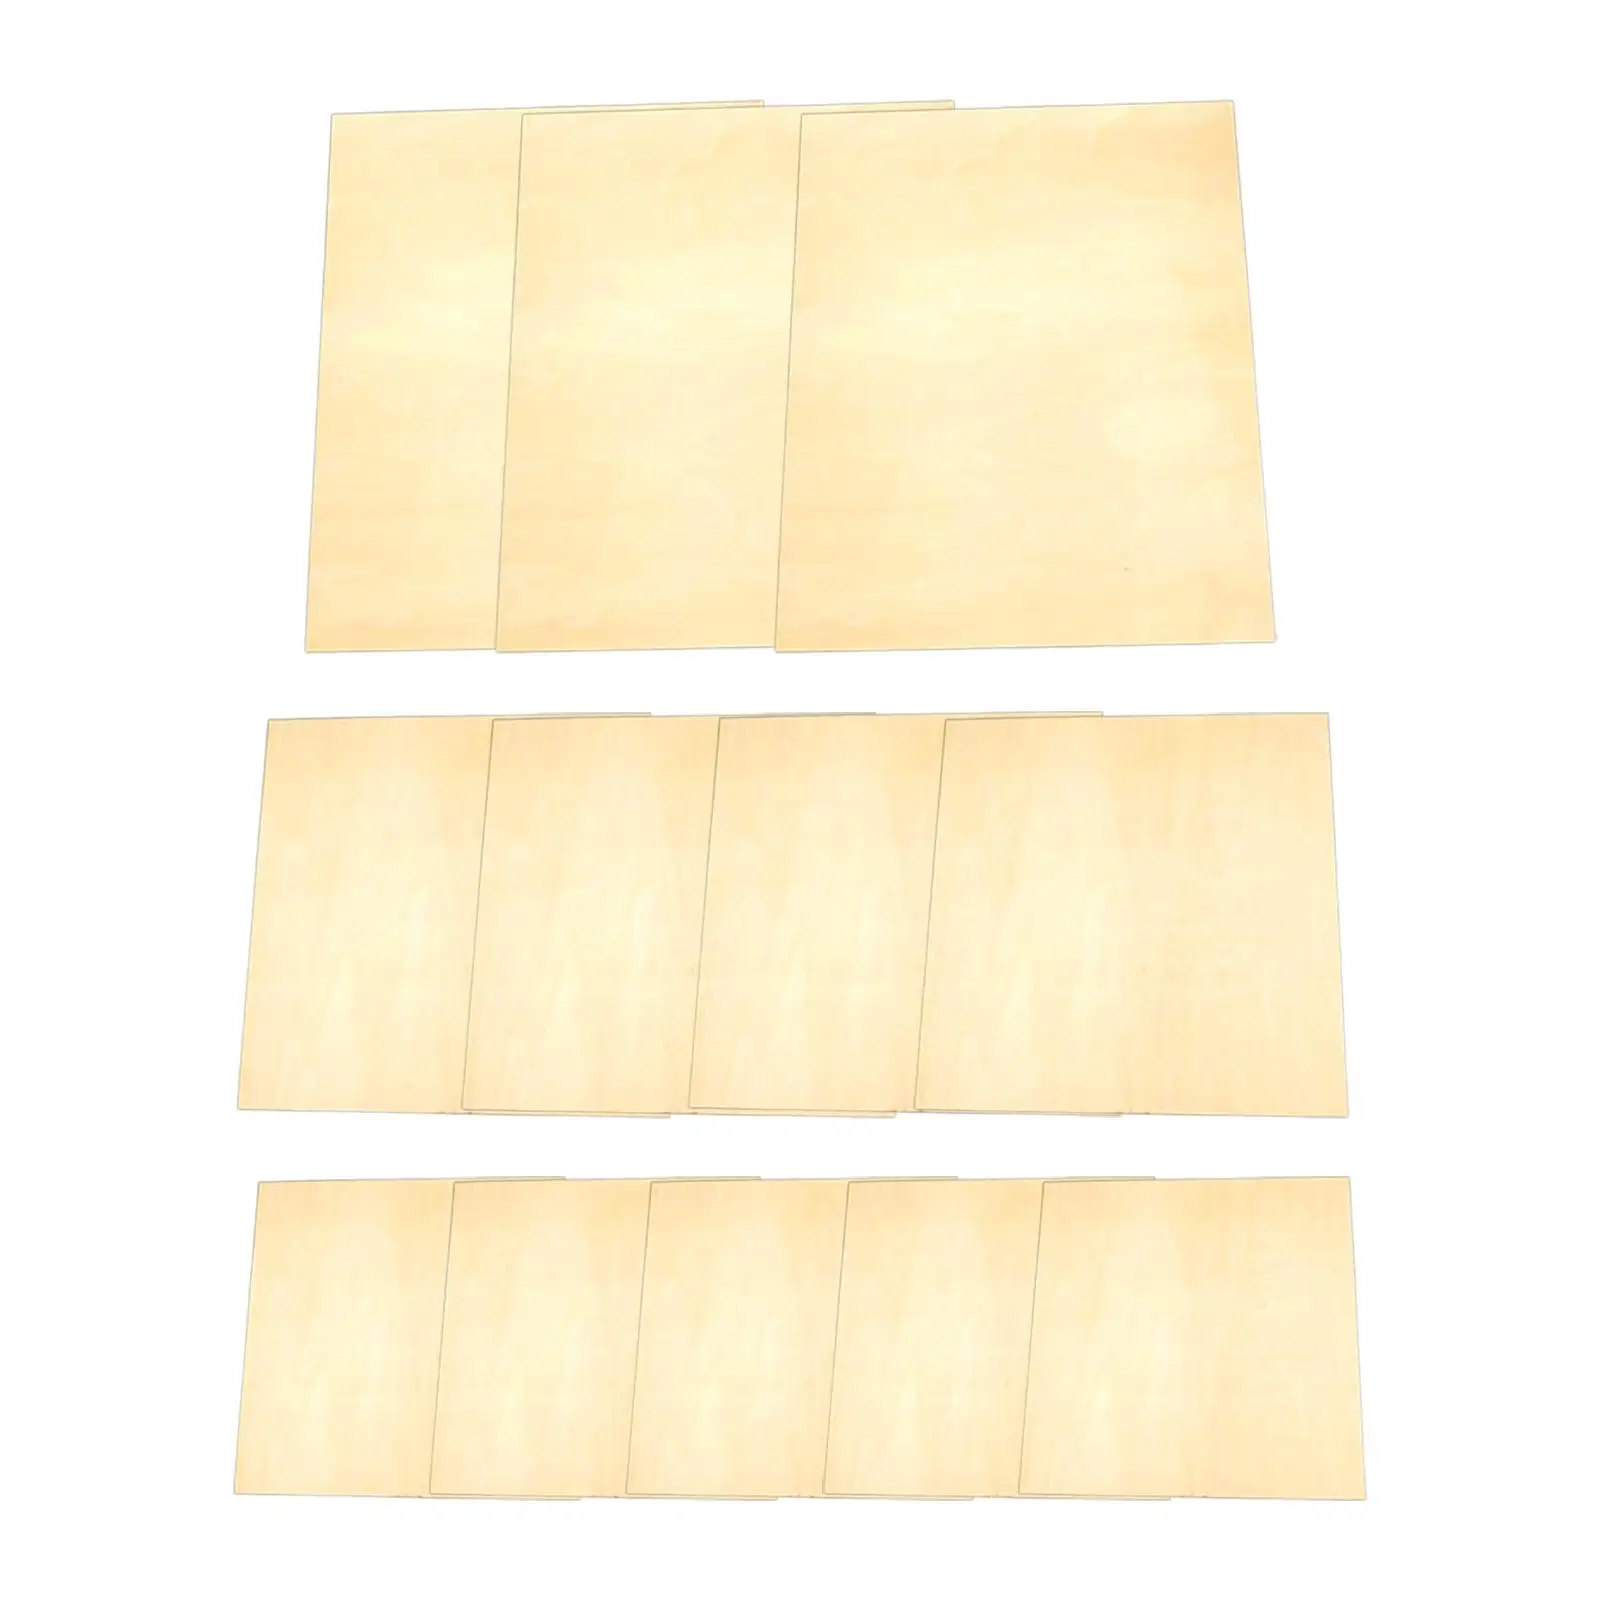 12Pcs/Set Wooden Panel Boards Unfinished Wood Veneer Sheets Painting Supply Painting Board DIY 3 Sizes for Painting Drawing Wall